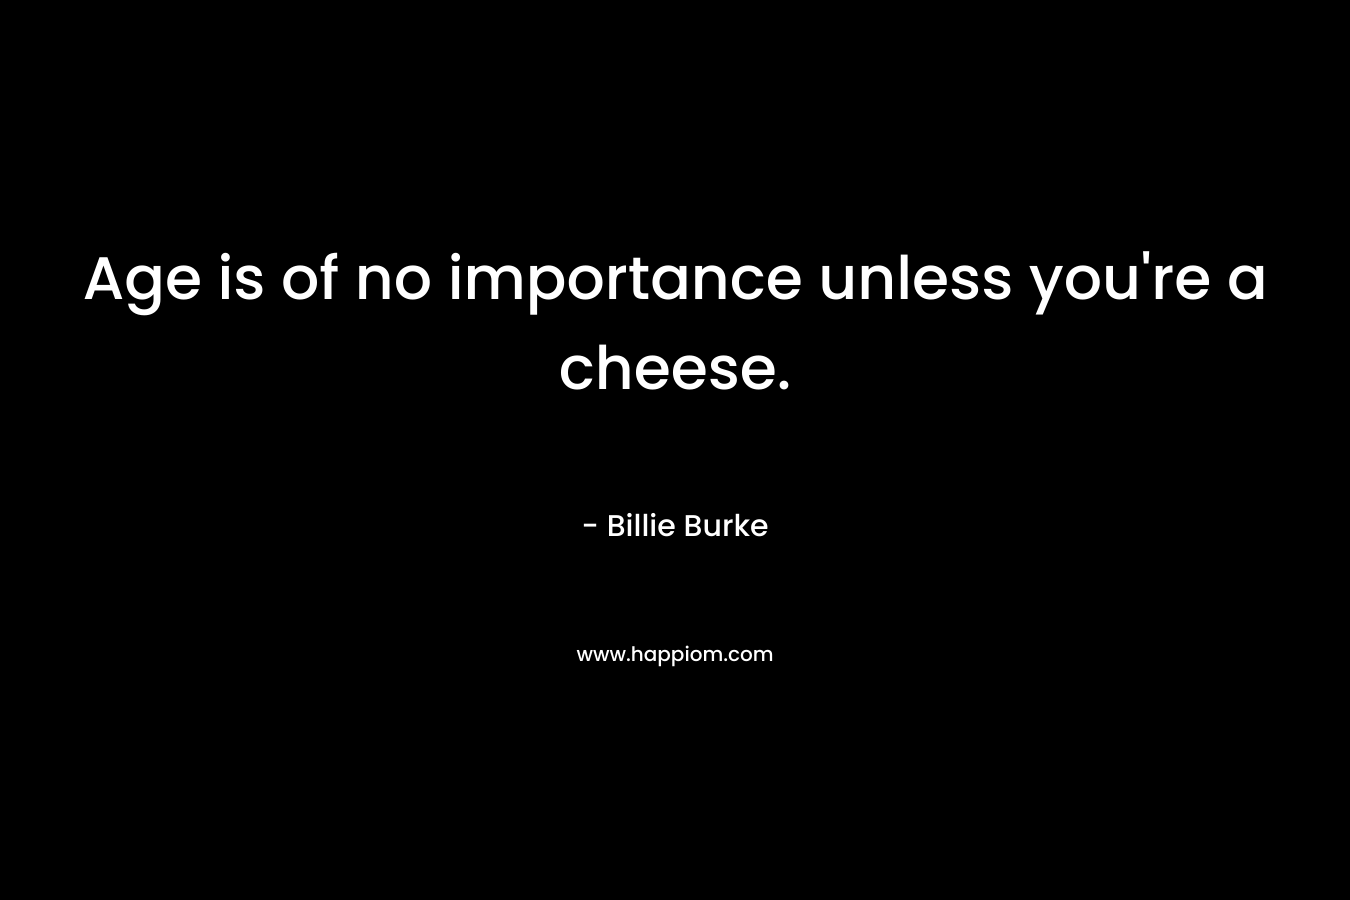 Age is of no importance unless you’re a cheese. – Billie Burke